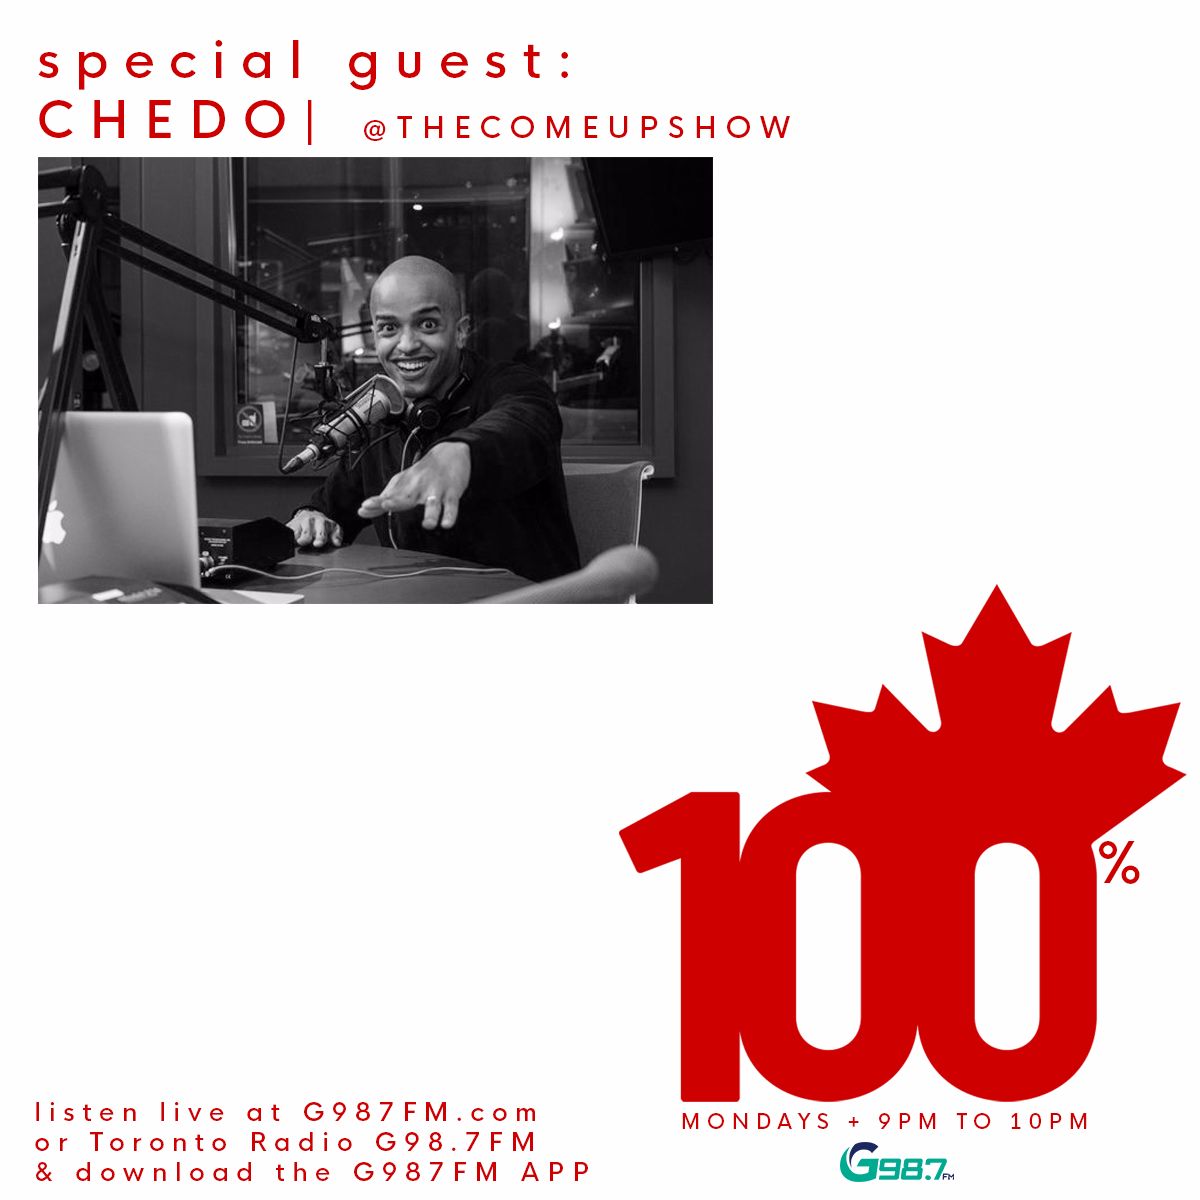 Thumbnail for "Bonus Ep: Chedo co-hosts 100% Canadian w/ R.Chung on G98.7fm".